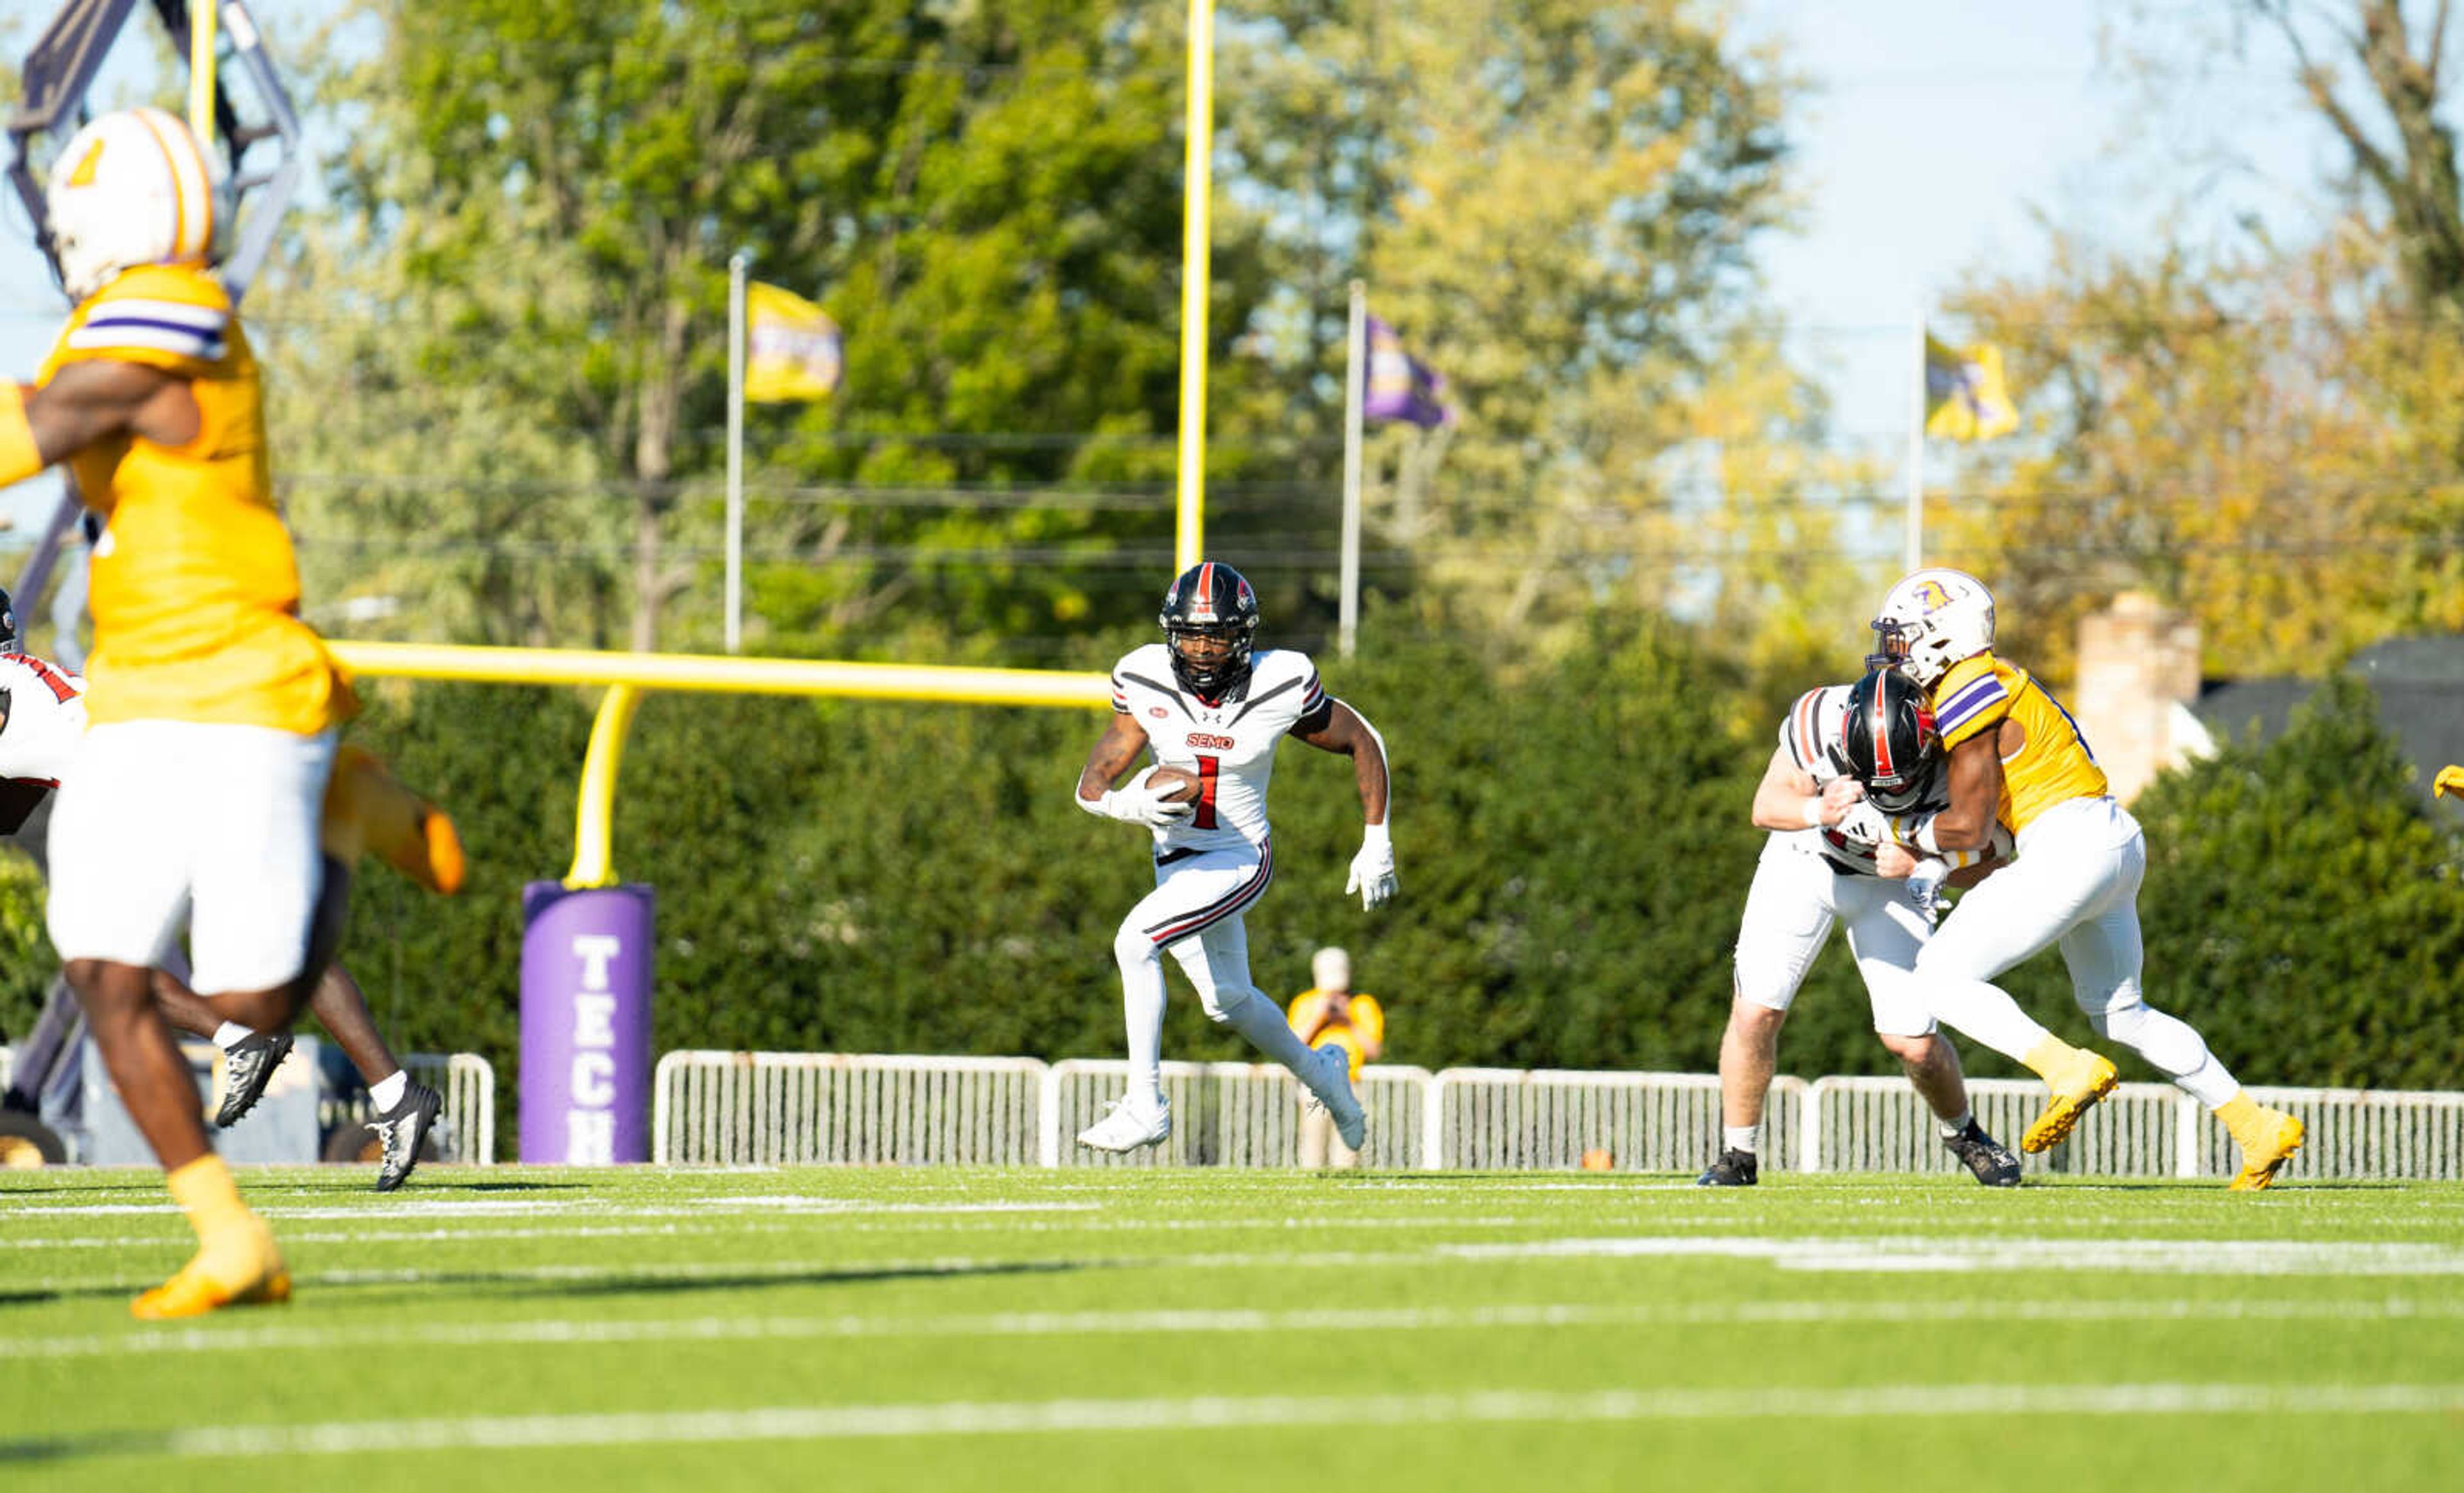 Senior wide receiver Ryan Flournoy adds yards after the catch against the Tennessee Tech Golden Eagles on Oct. 21. Flournoy would finish the game with 6 catches for 203 yards and 1 touchdown.